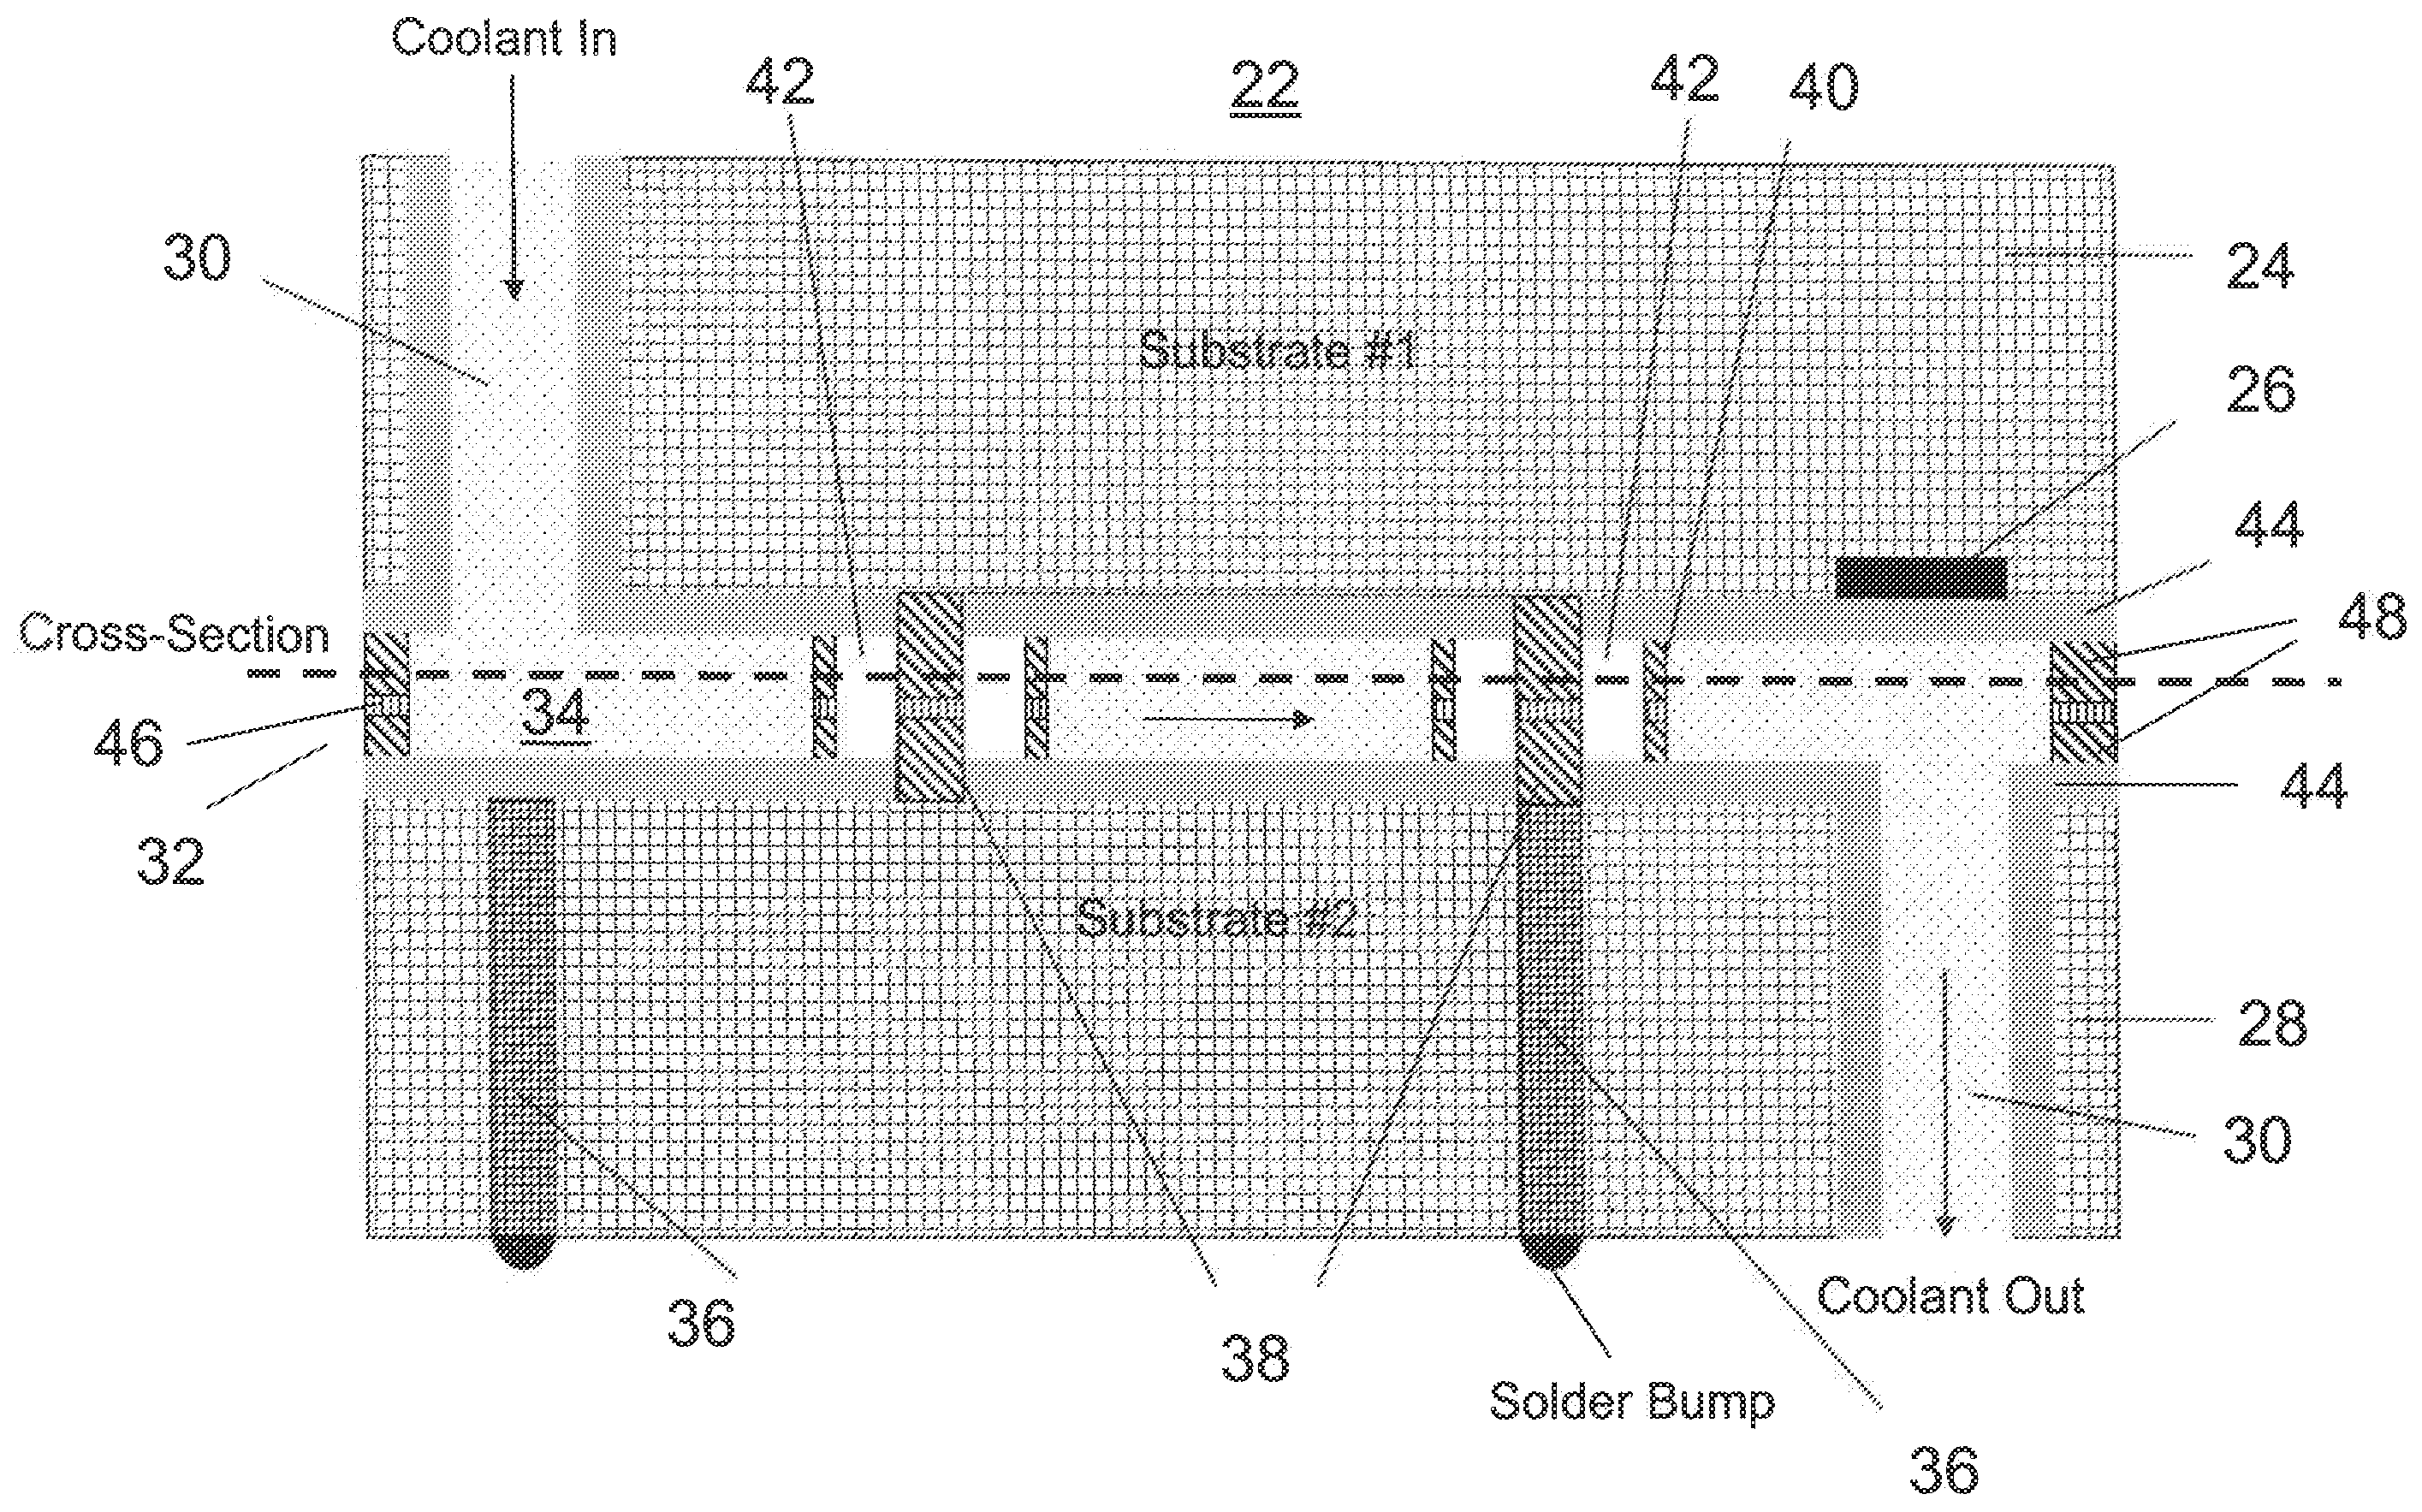 Structure and process for electrical interconnect and thermal management